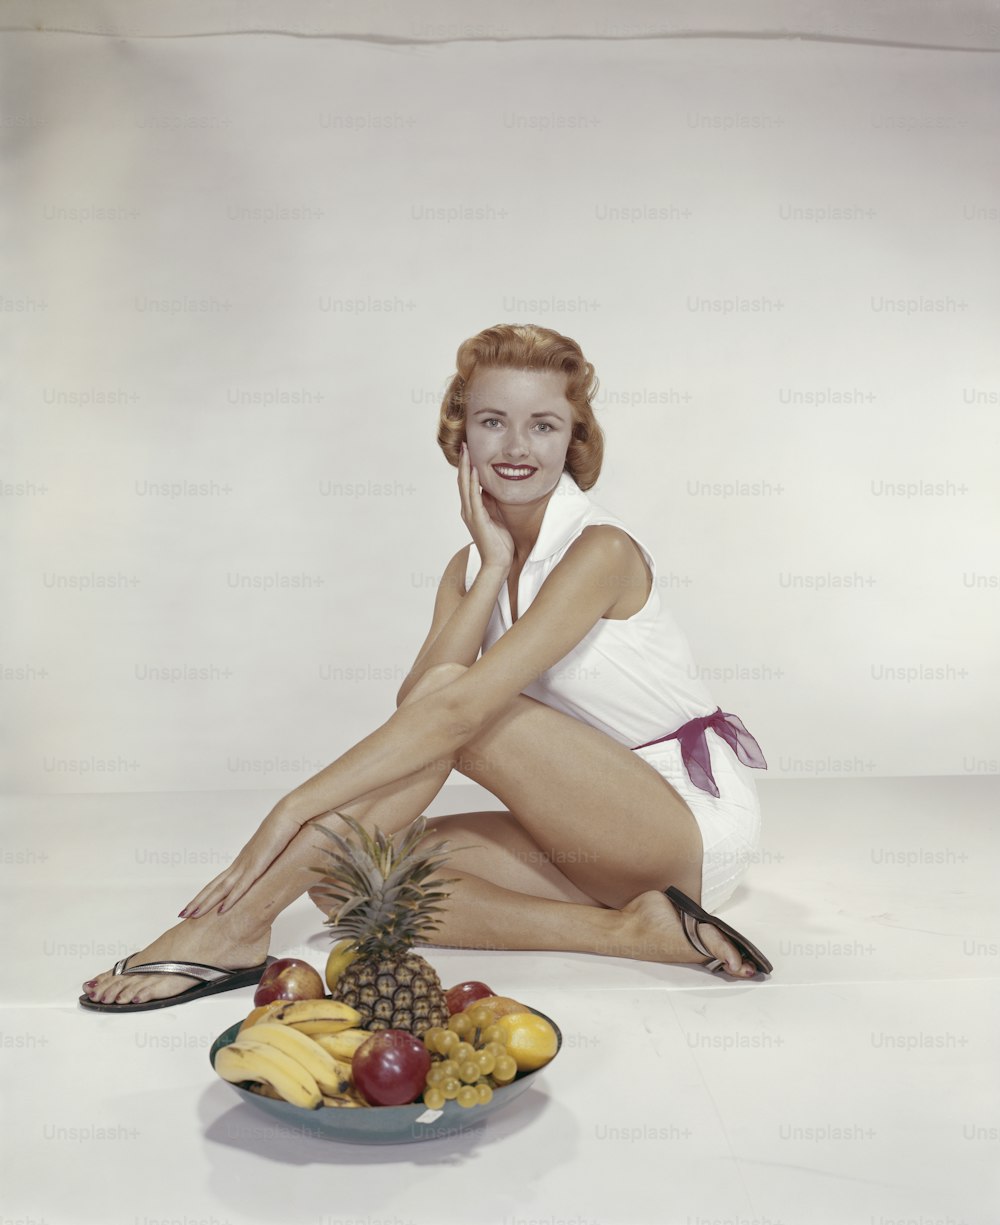 a woman sitting on the ground next to a plate of fruit